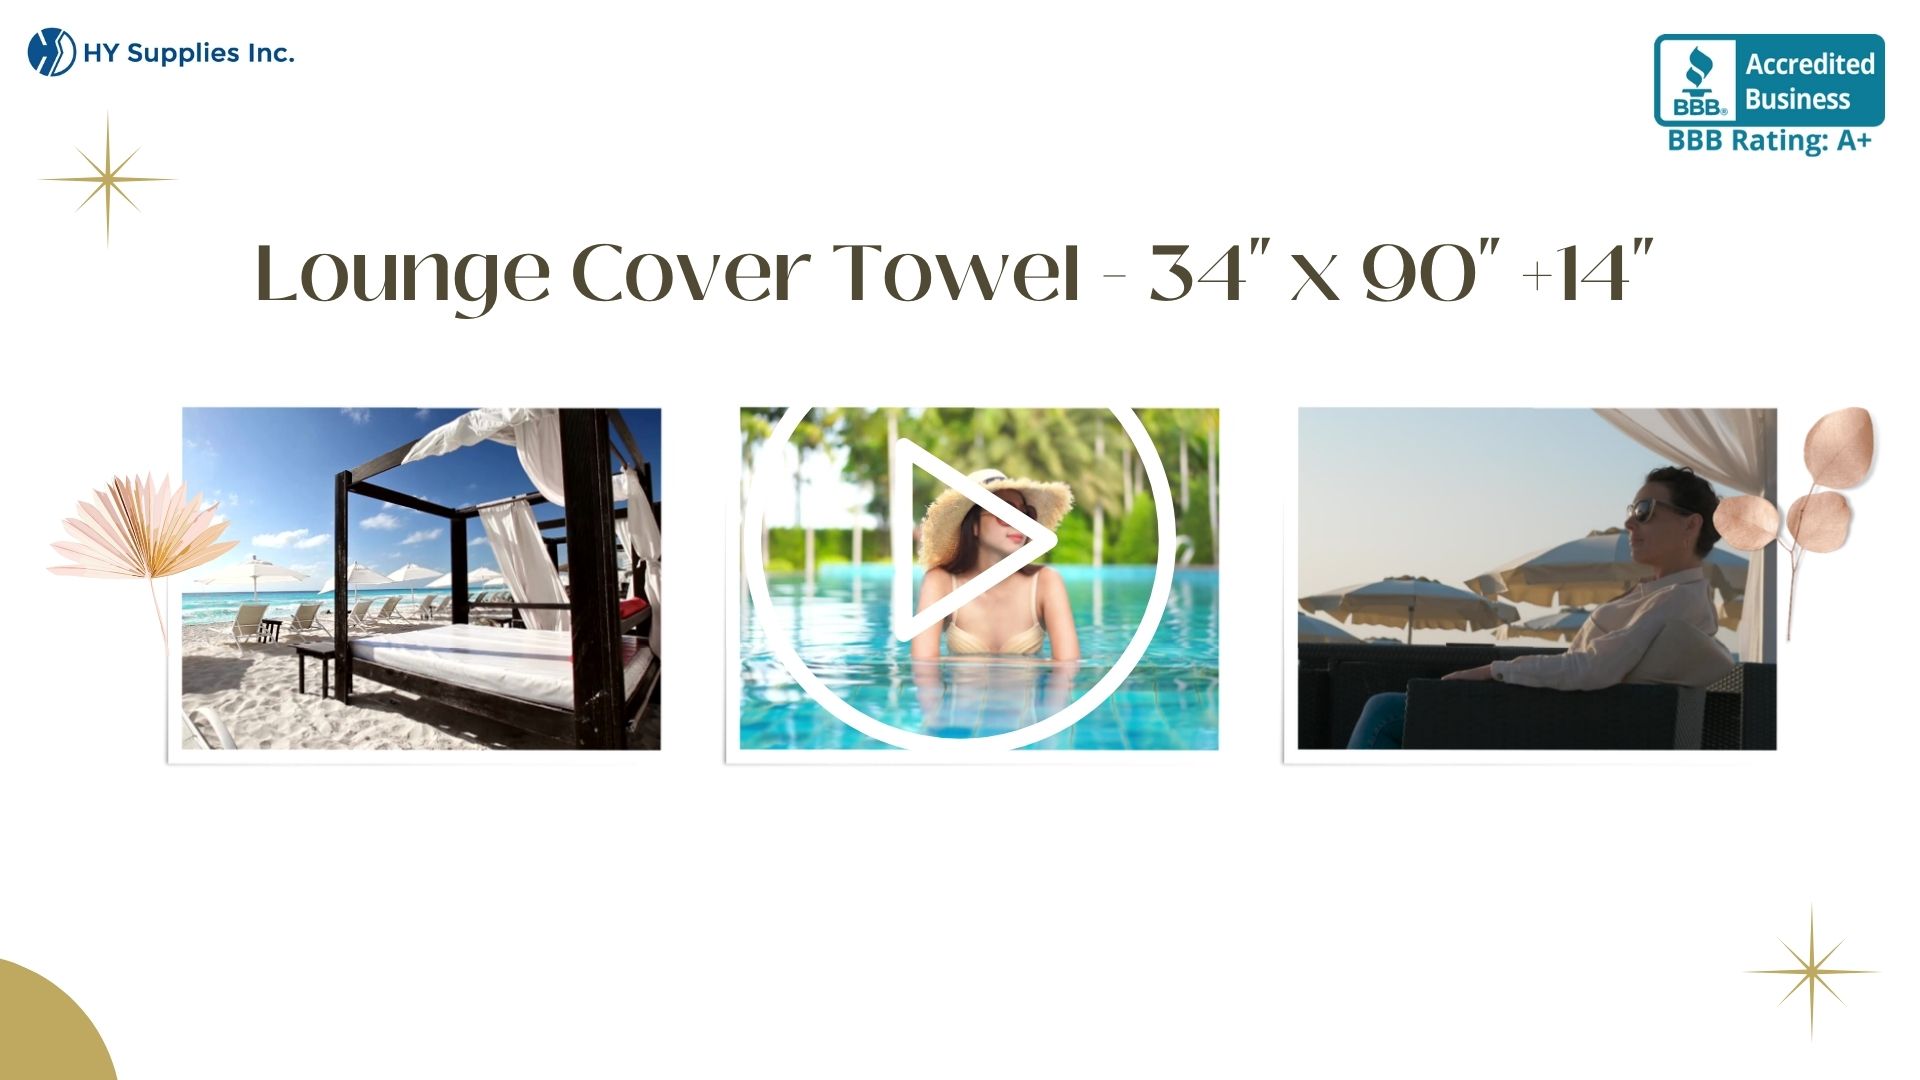 Lounge Cover Towel - 34" x 90" +14"